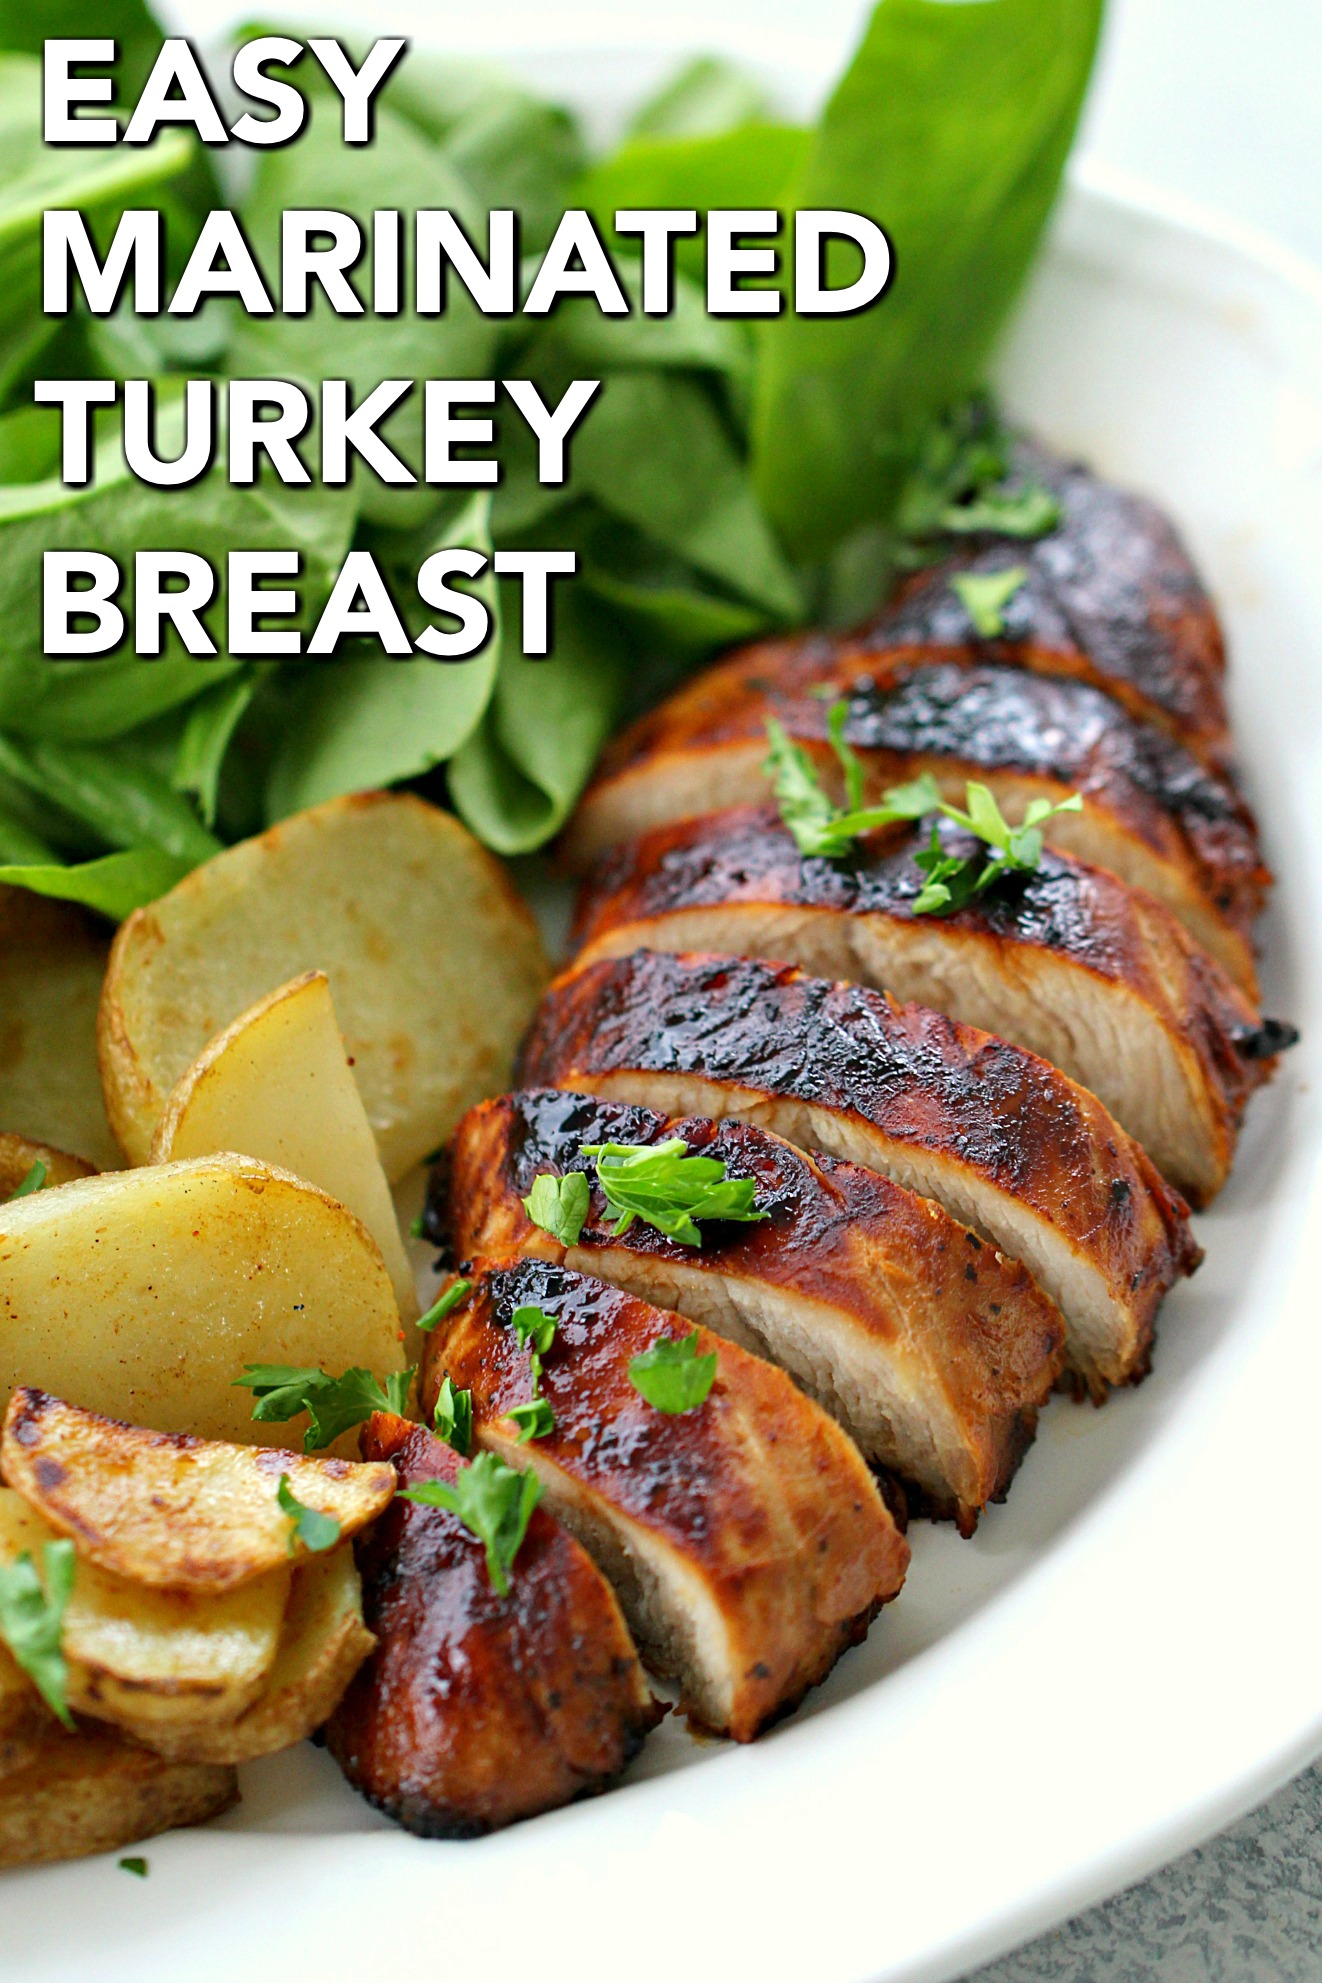 Easy Marinated Turkey Breast sliced, on a plate with potatoes and salad